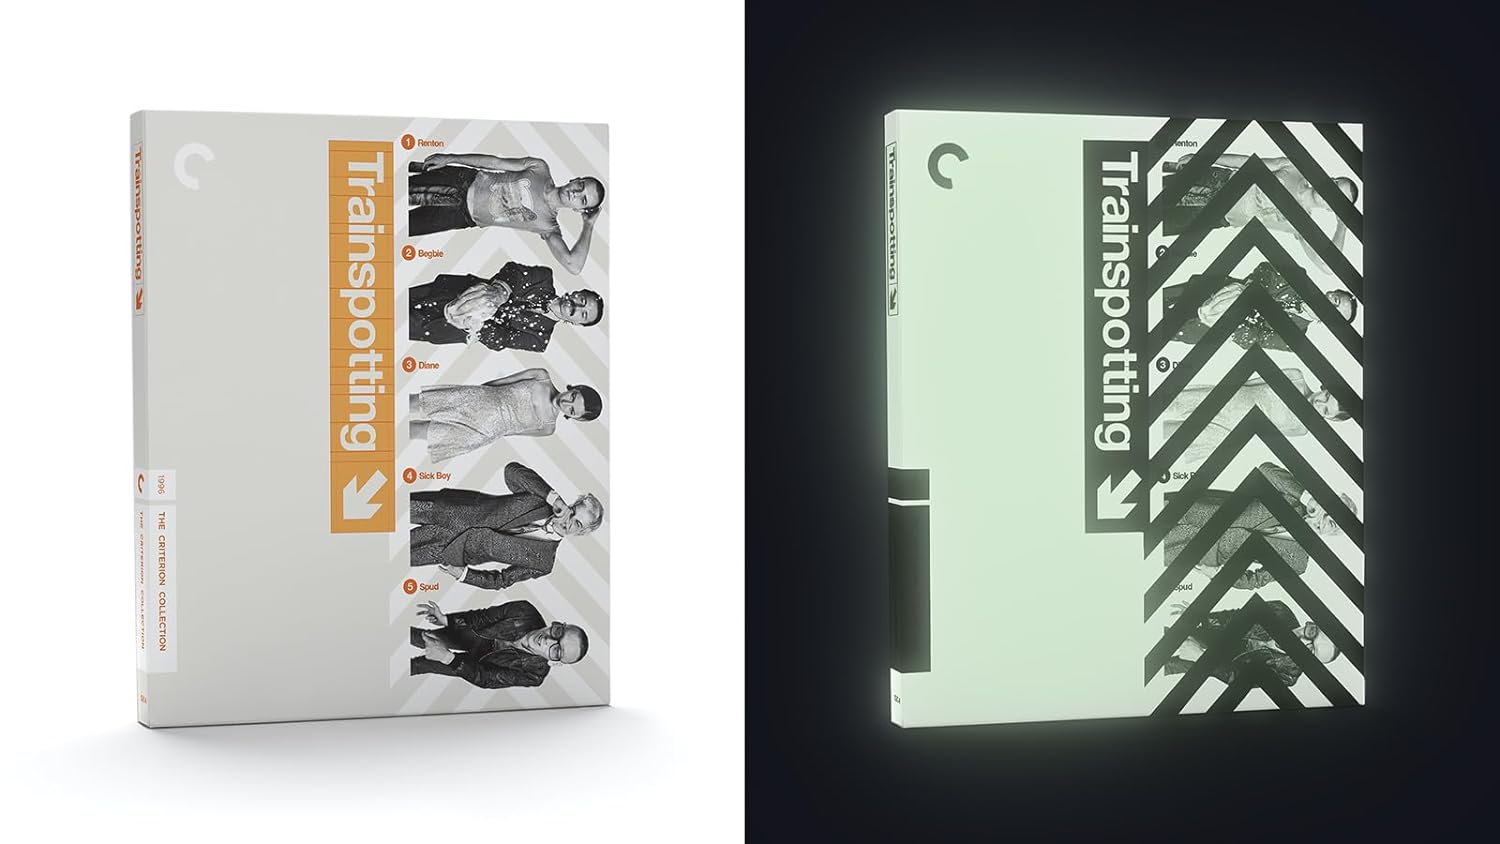 Trainspotting 4k UHD Criterion Collection Glow-In-The-Dark Packaging